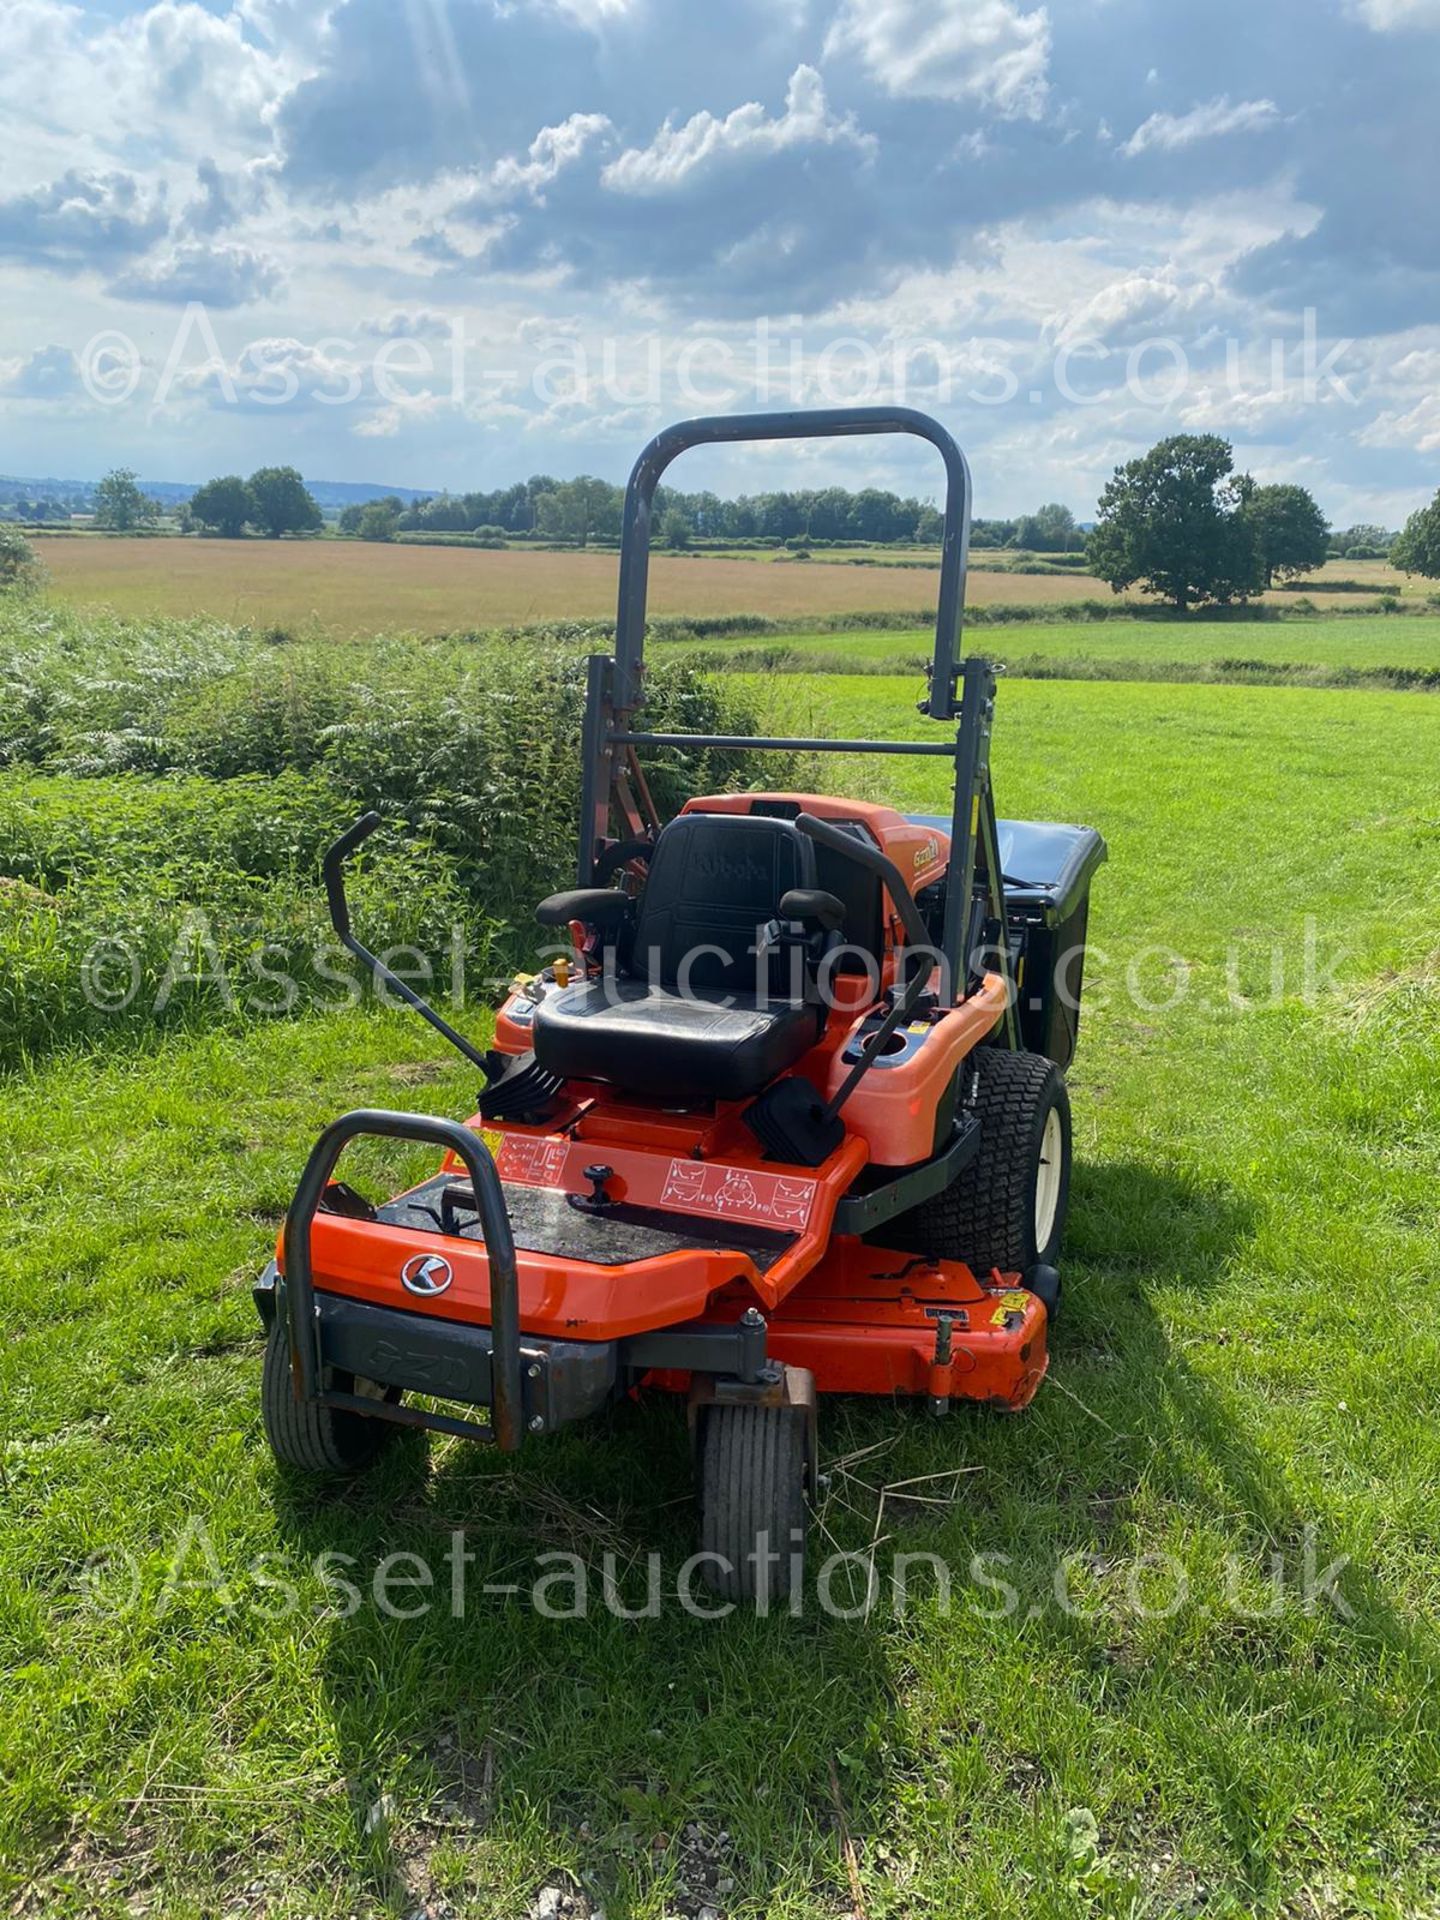 2015 KUBOTA GZD21 HIGH TIP ZERO TURN MOWER, SOLD NEW MID 2017, SHOWING A LOW 203 HOURS *PLUS VAT* - Image 7 of 16